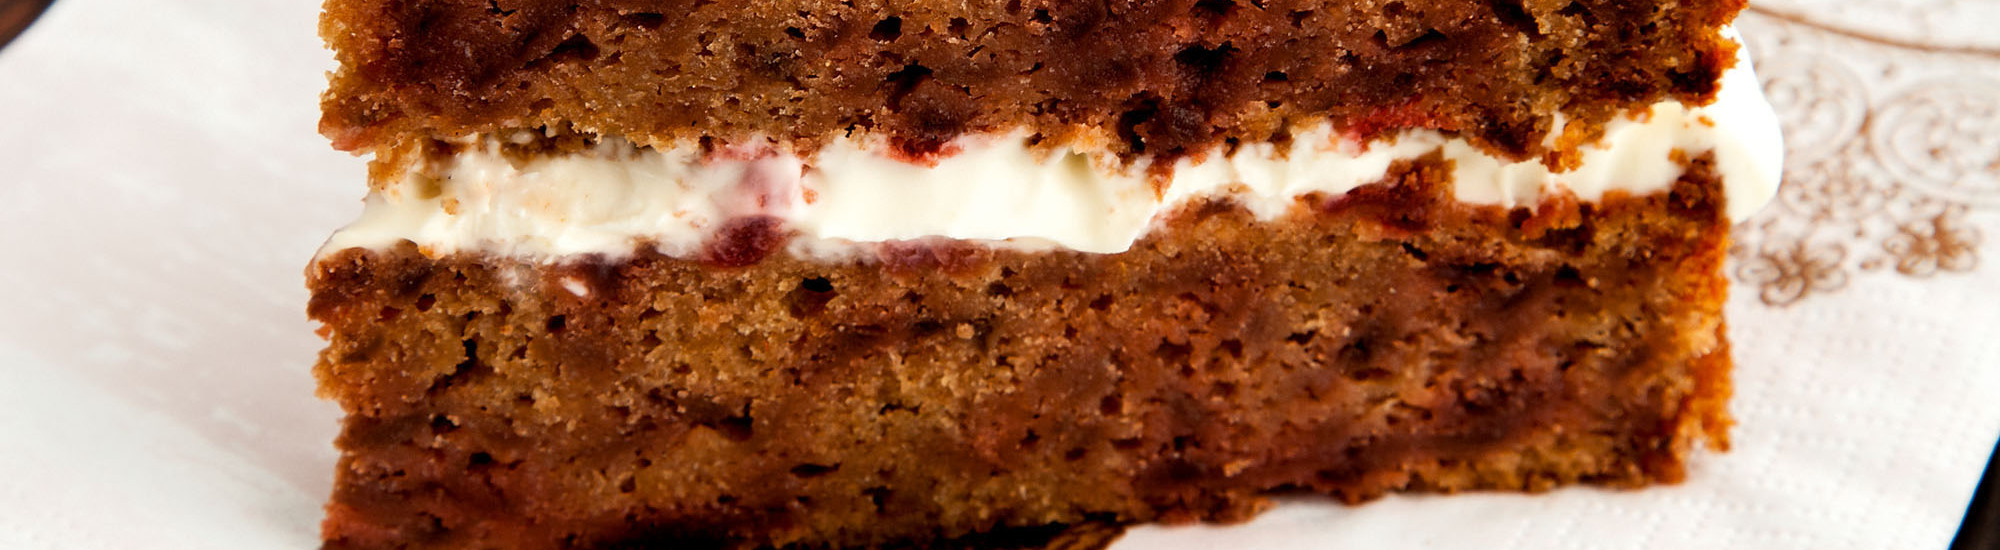 Spiced beetroot cake with mascarpone recipe